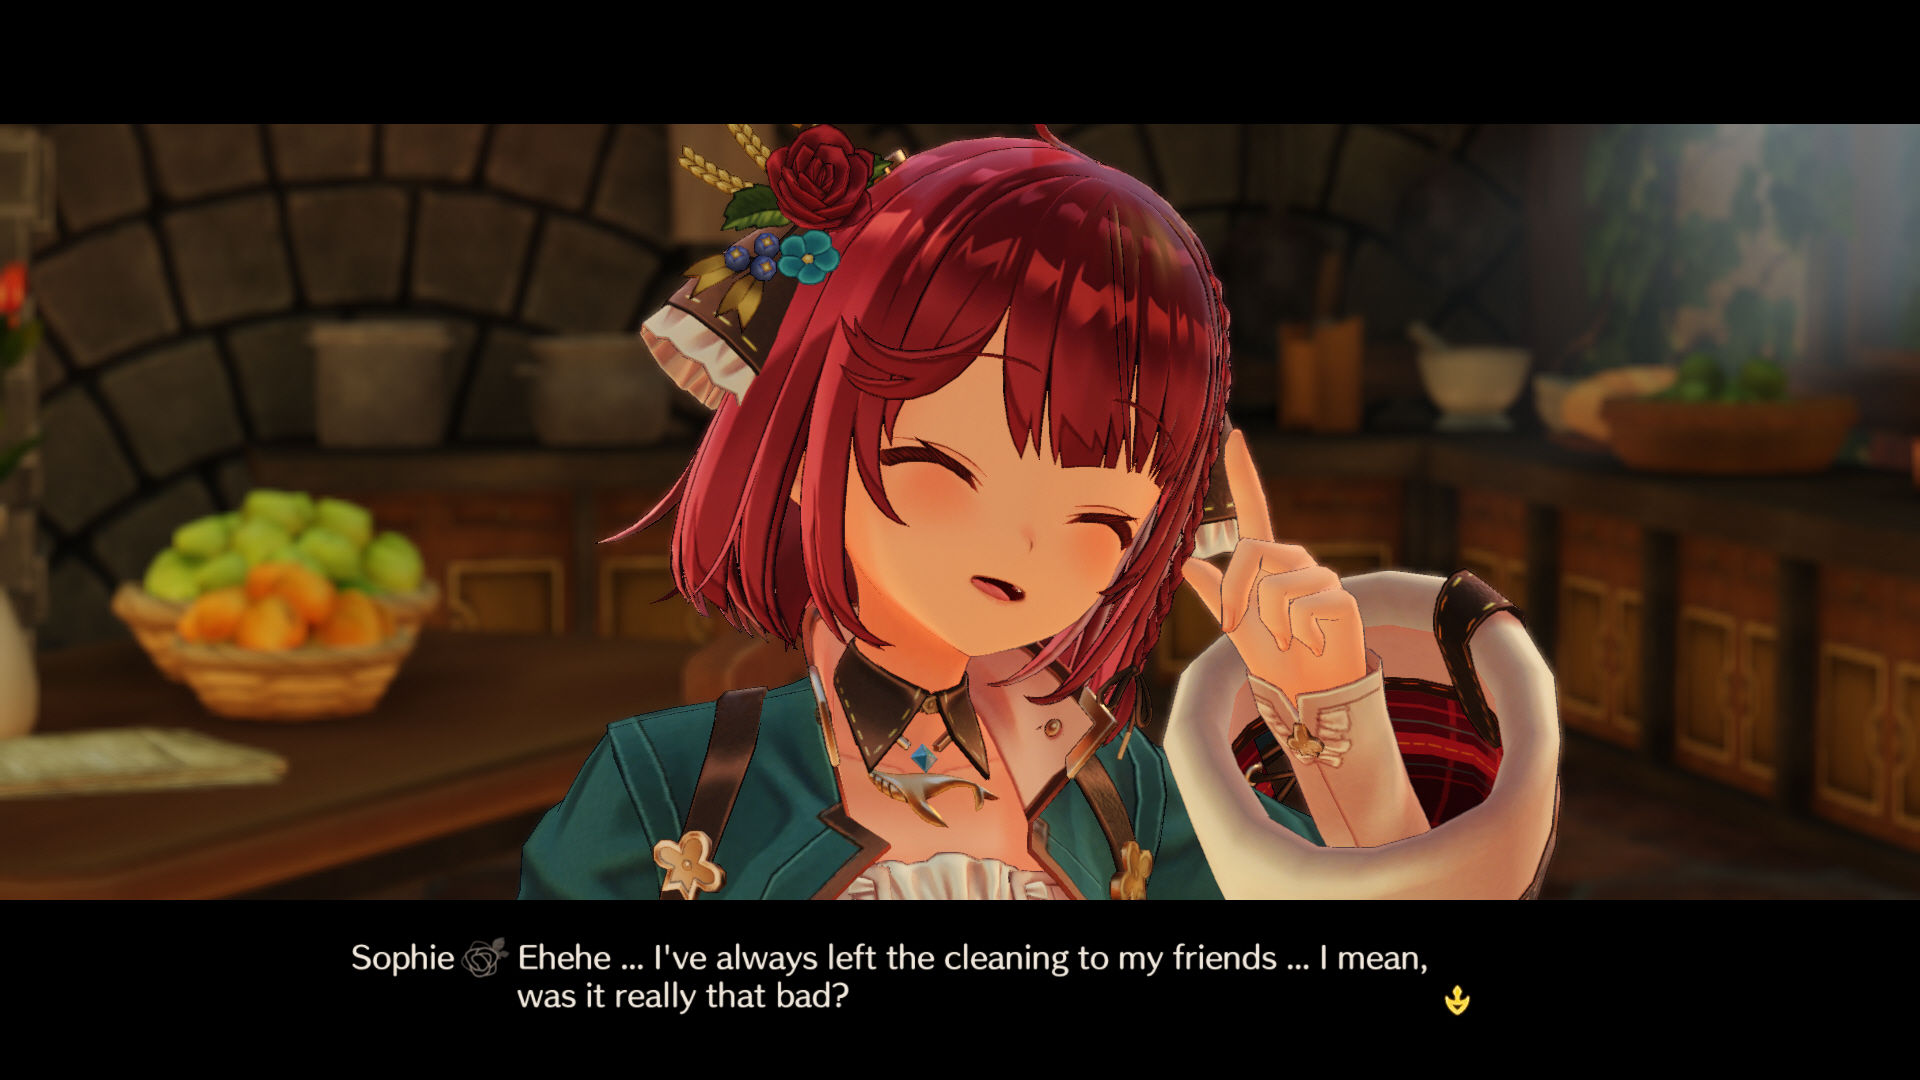 Atelier sophie 2 the alchemist of the mysterious dream screenshot 6 7